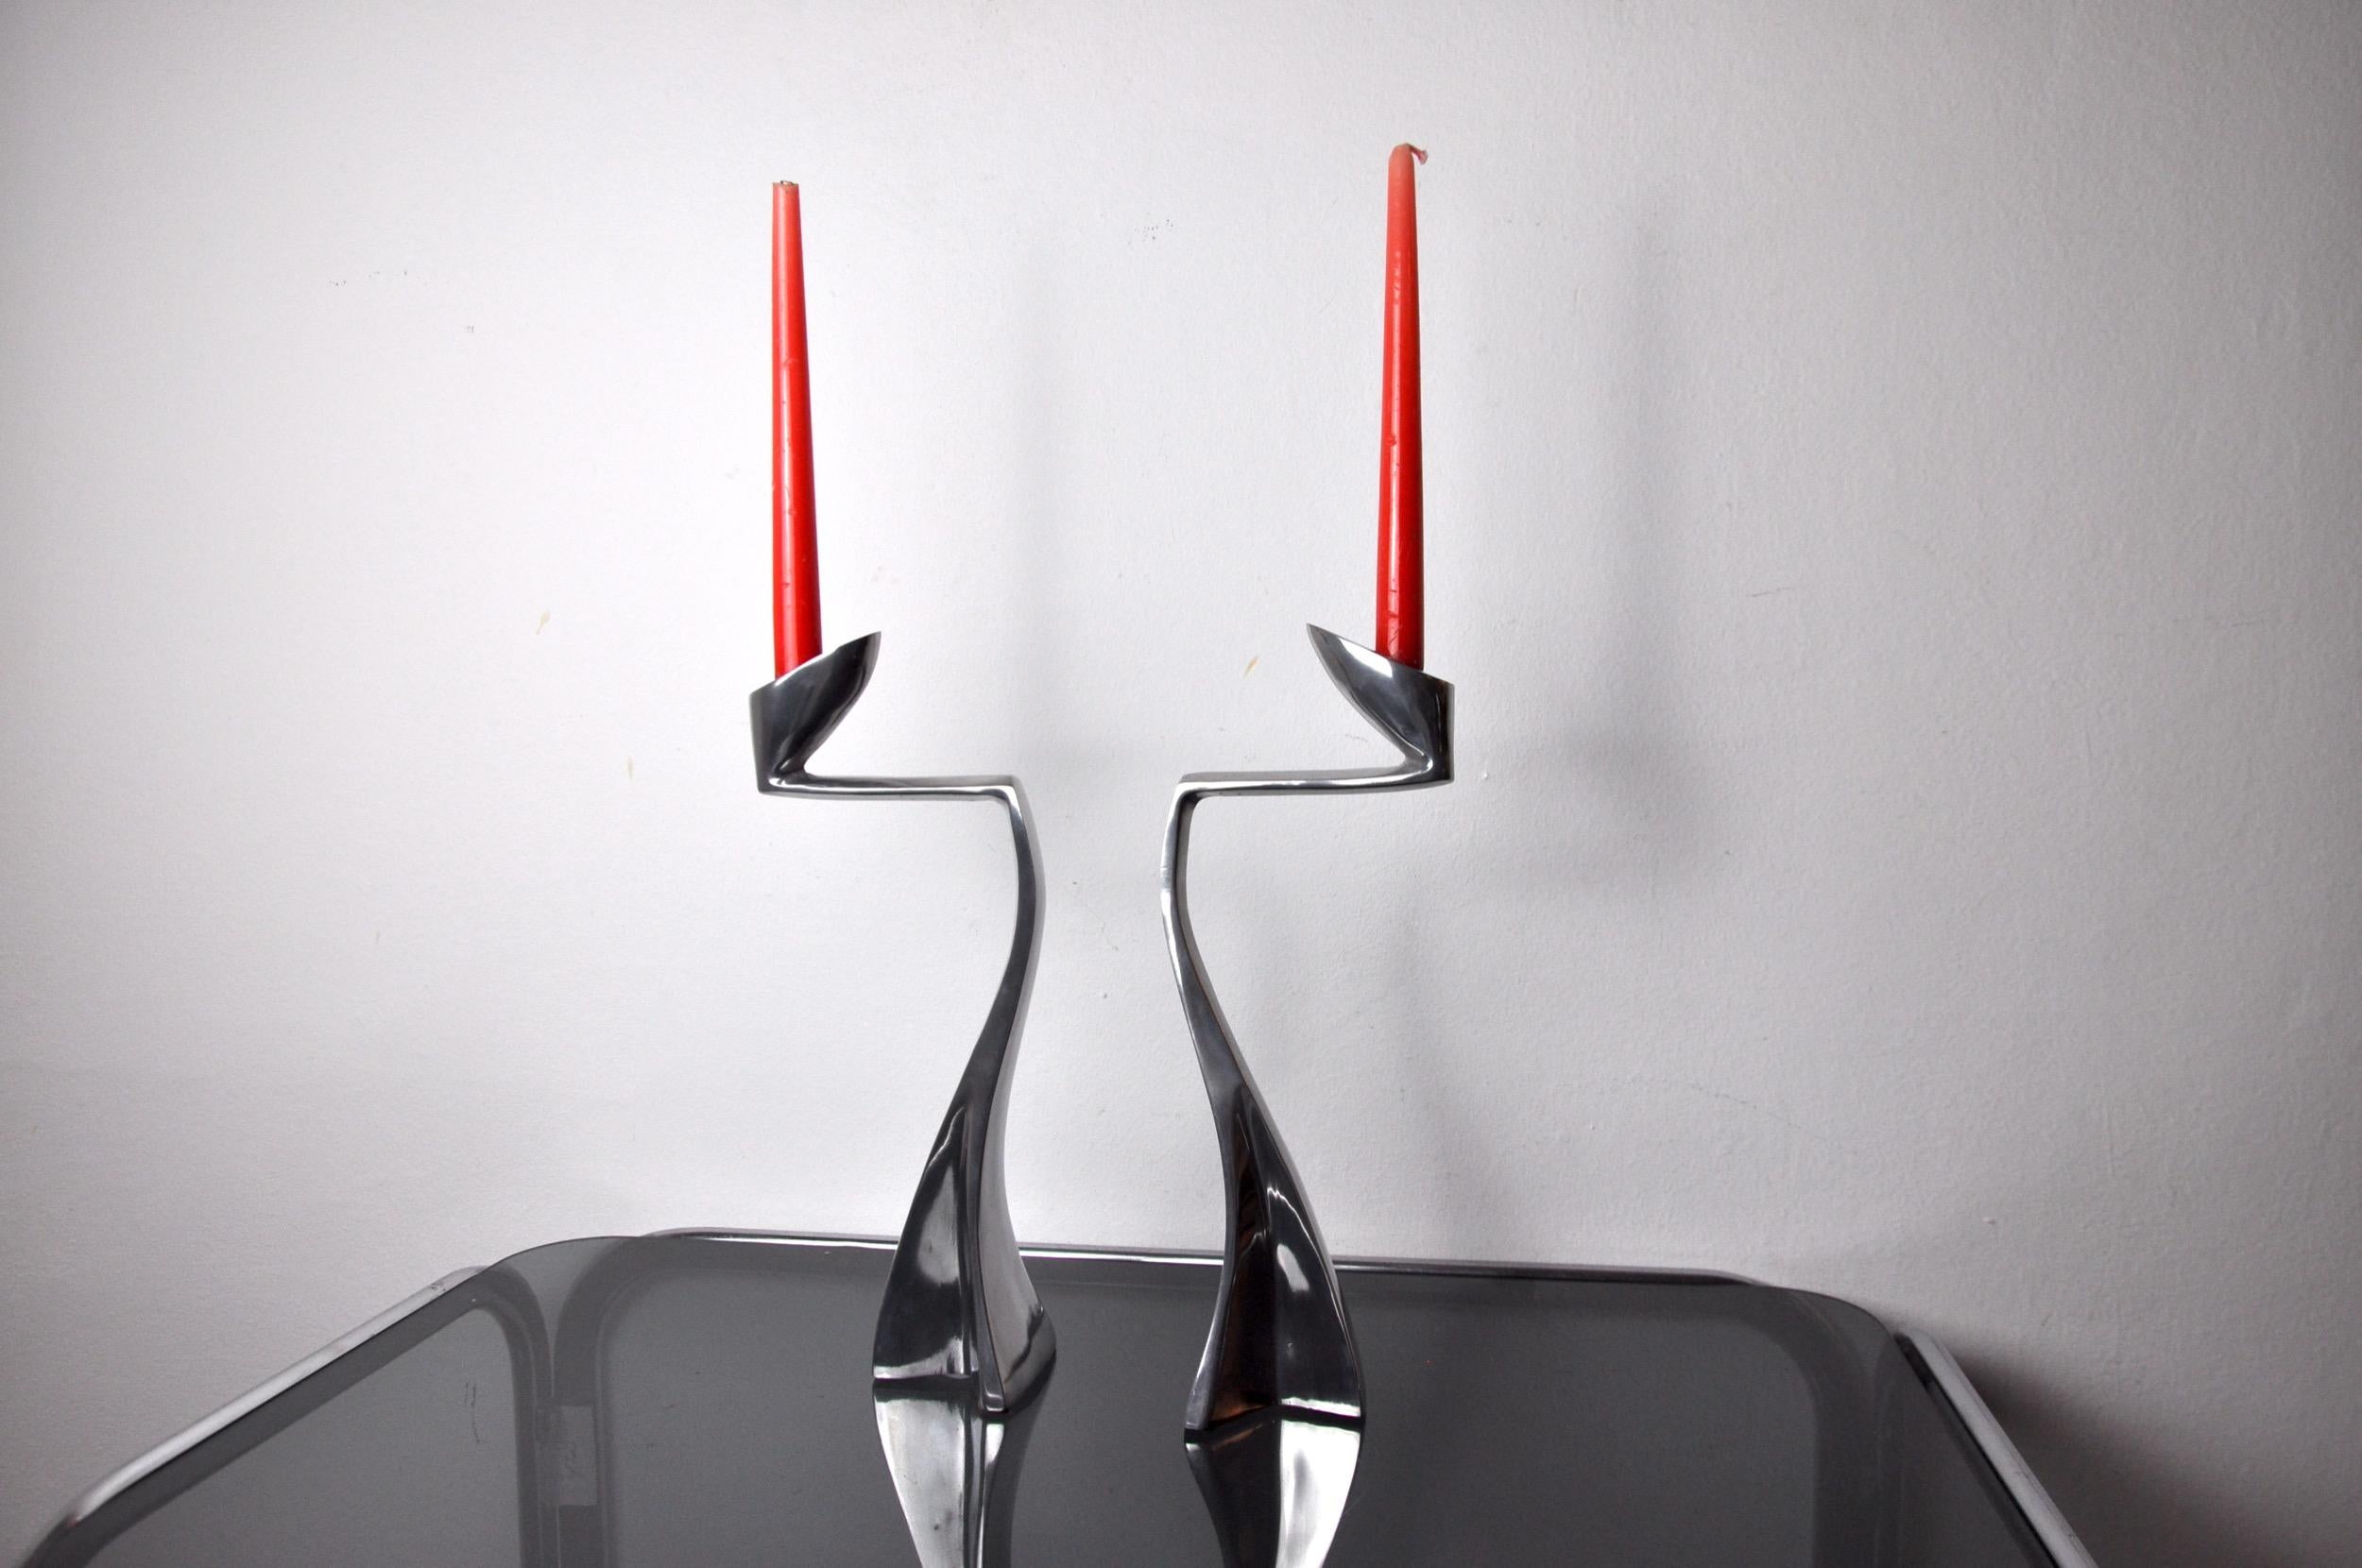 Pair of swam candlesticks designed and produced by Matthew Hilton for SCP England in England in the 1980s.

Set of two brutalist-shaped aluminum candlesticks reminiscent of the shape of swans.

Beautiful decorative objects that will bring a real